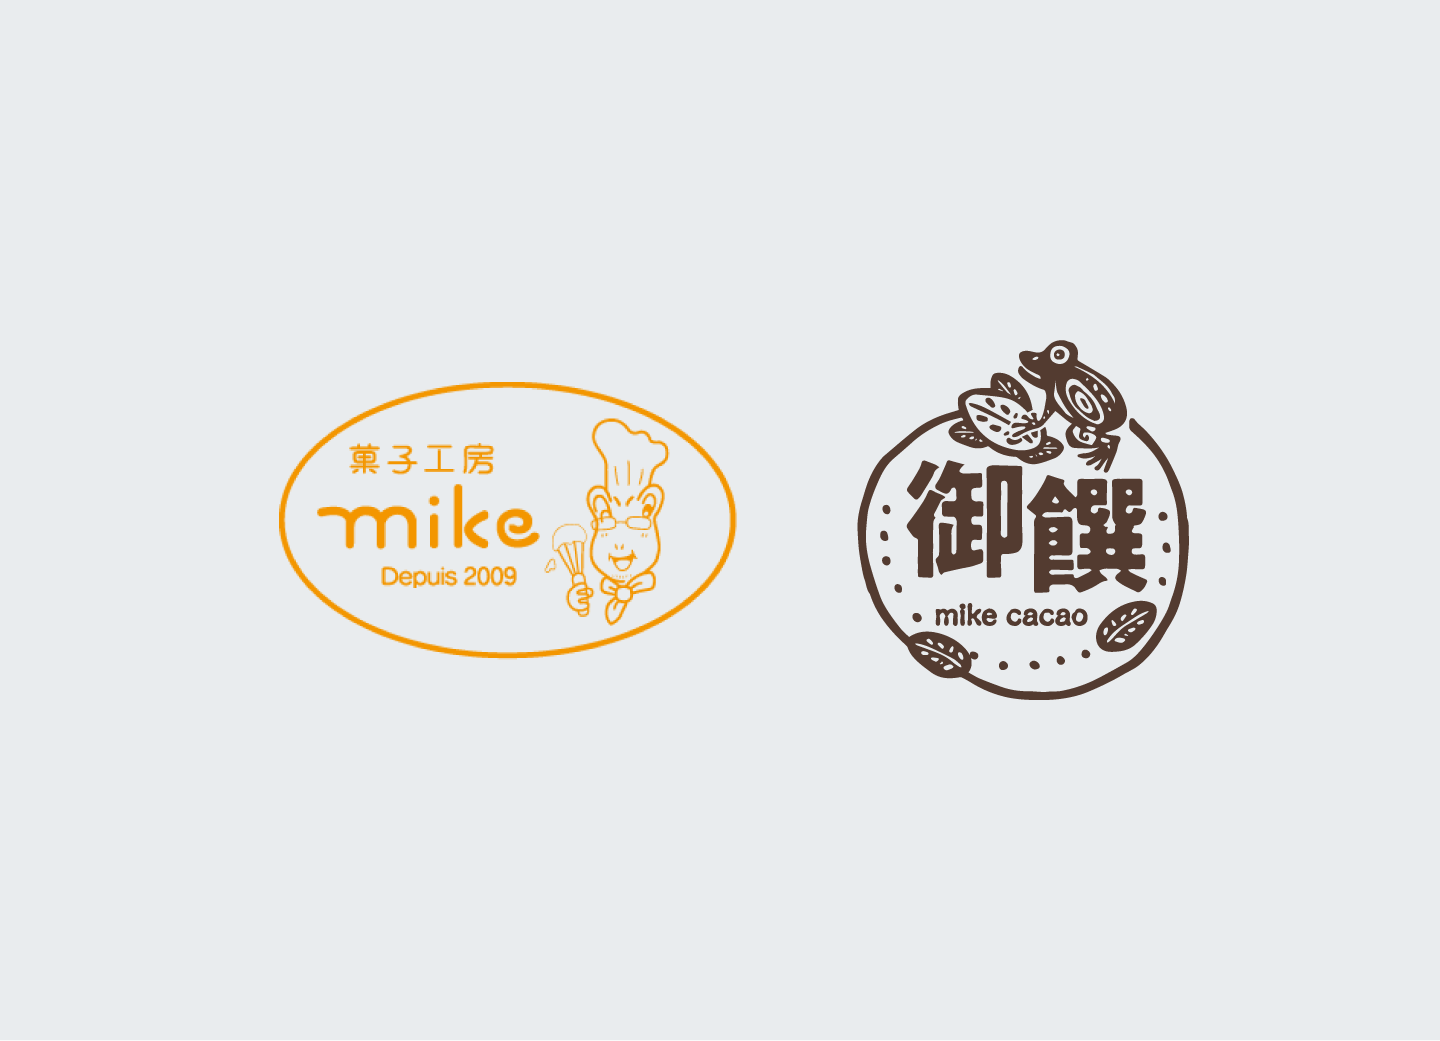 mikeのラッピング